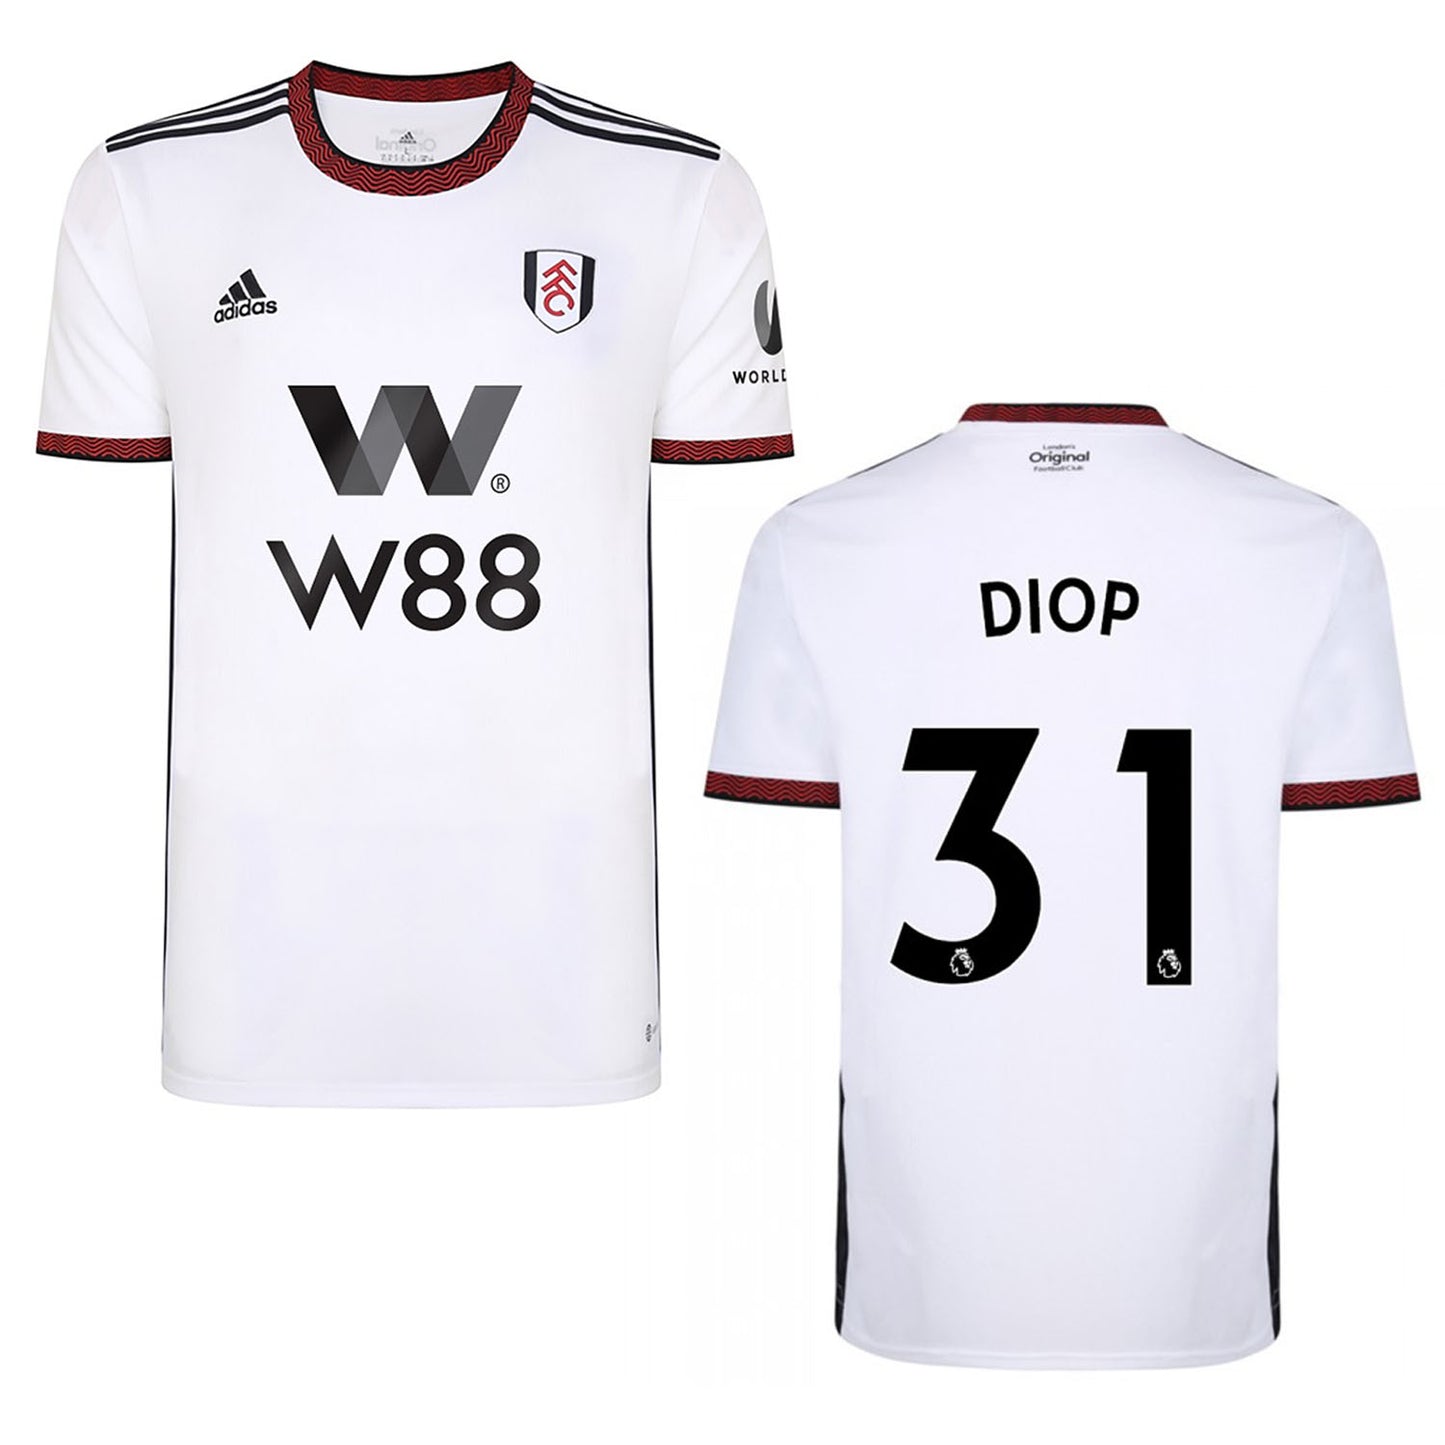 Issa Diop Fulham 31 Jersey